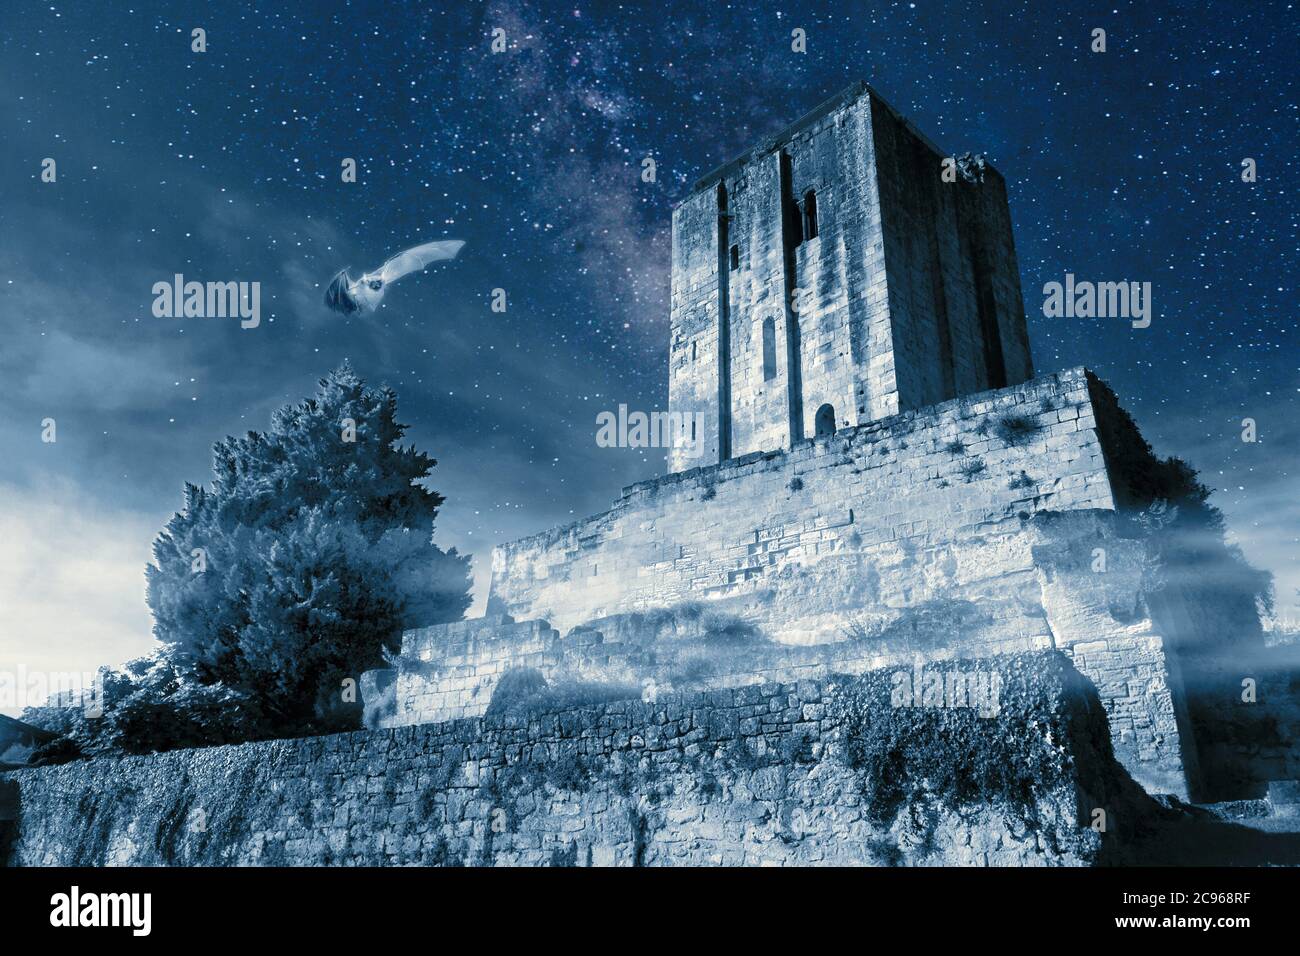 Tour du Roy Medieval tower night scene with bat in Saint Emilion France Stock Photo